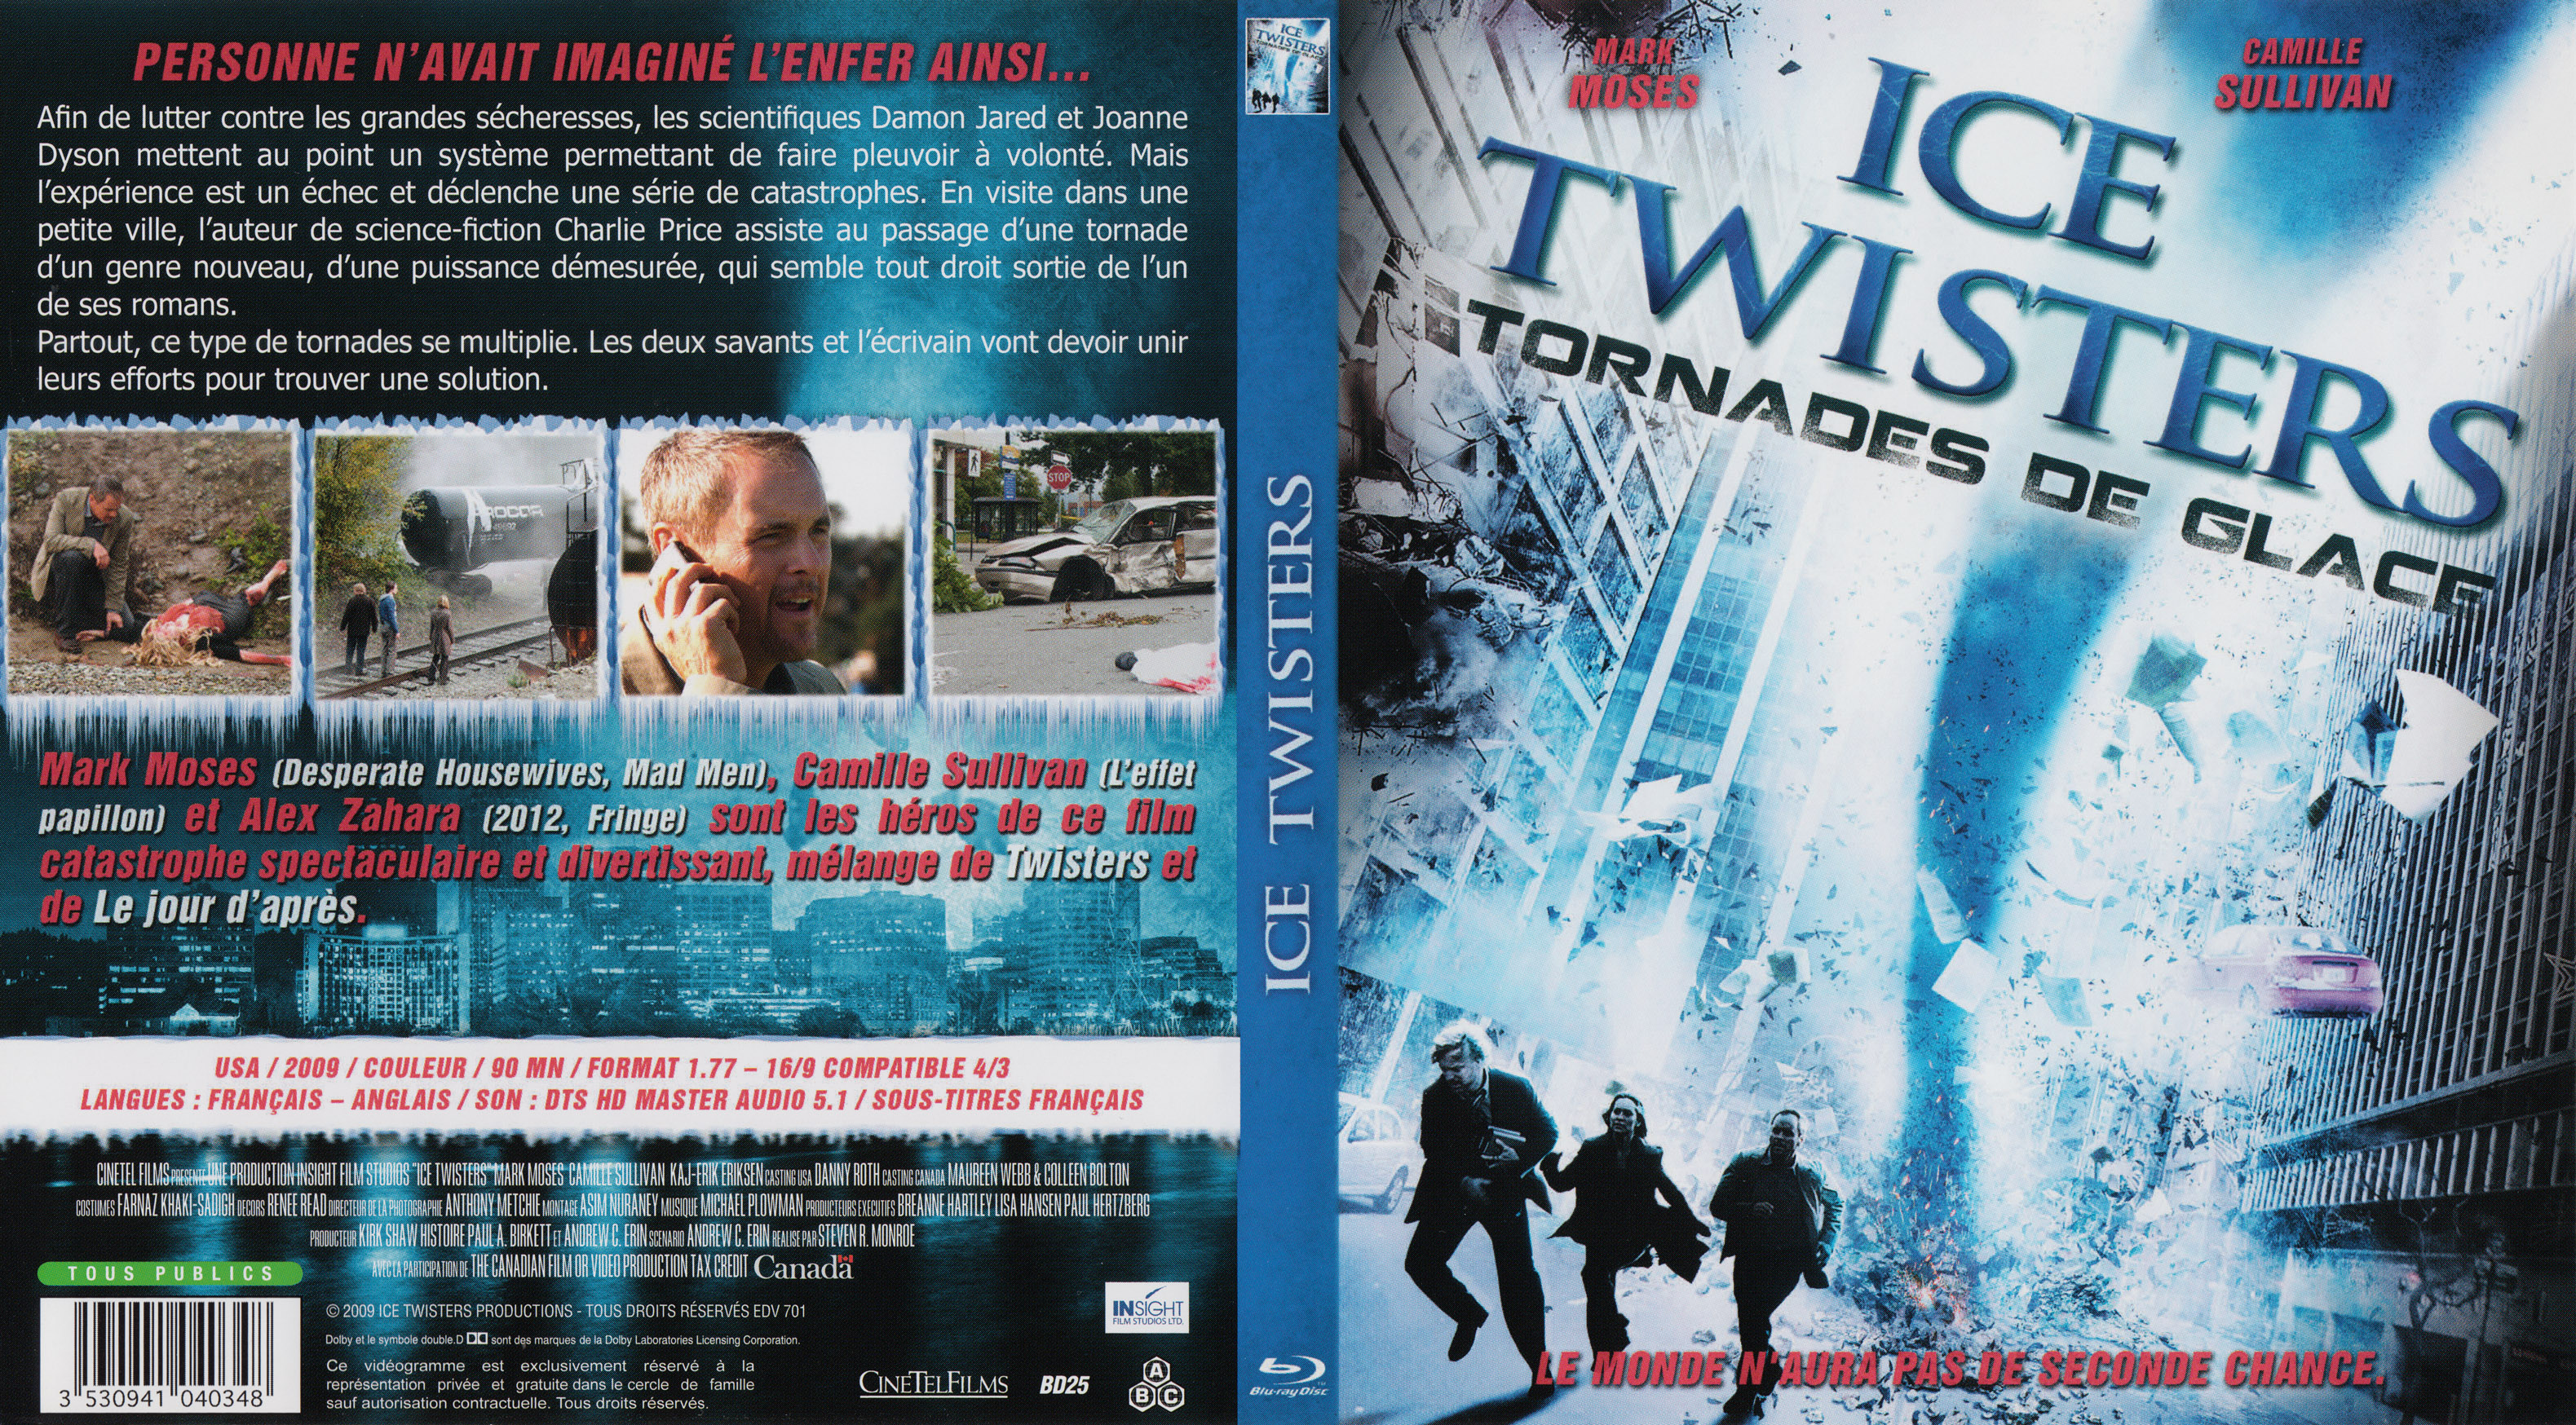 Jaquette DVD Ice twisters tornades de glace (BLU-RAY)